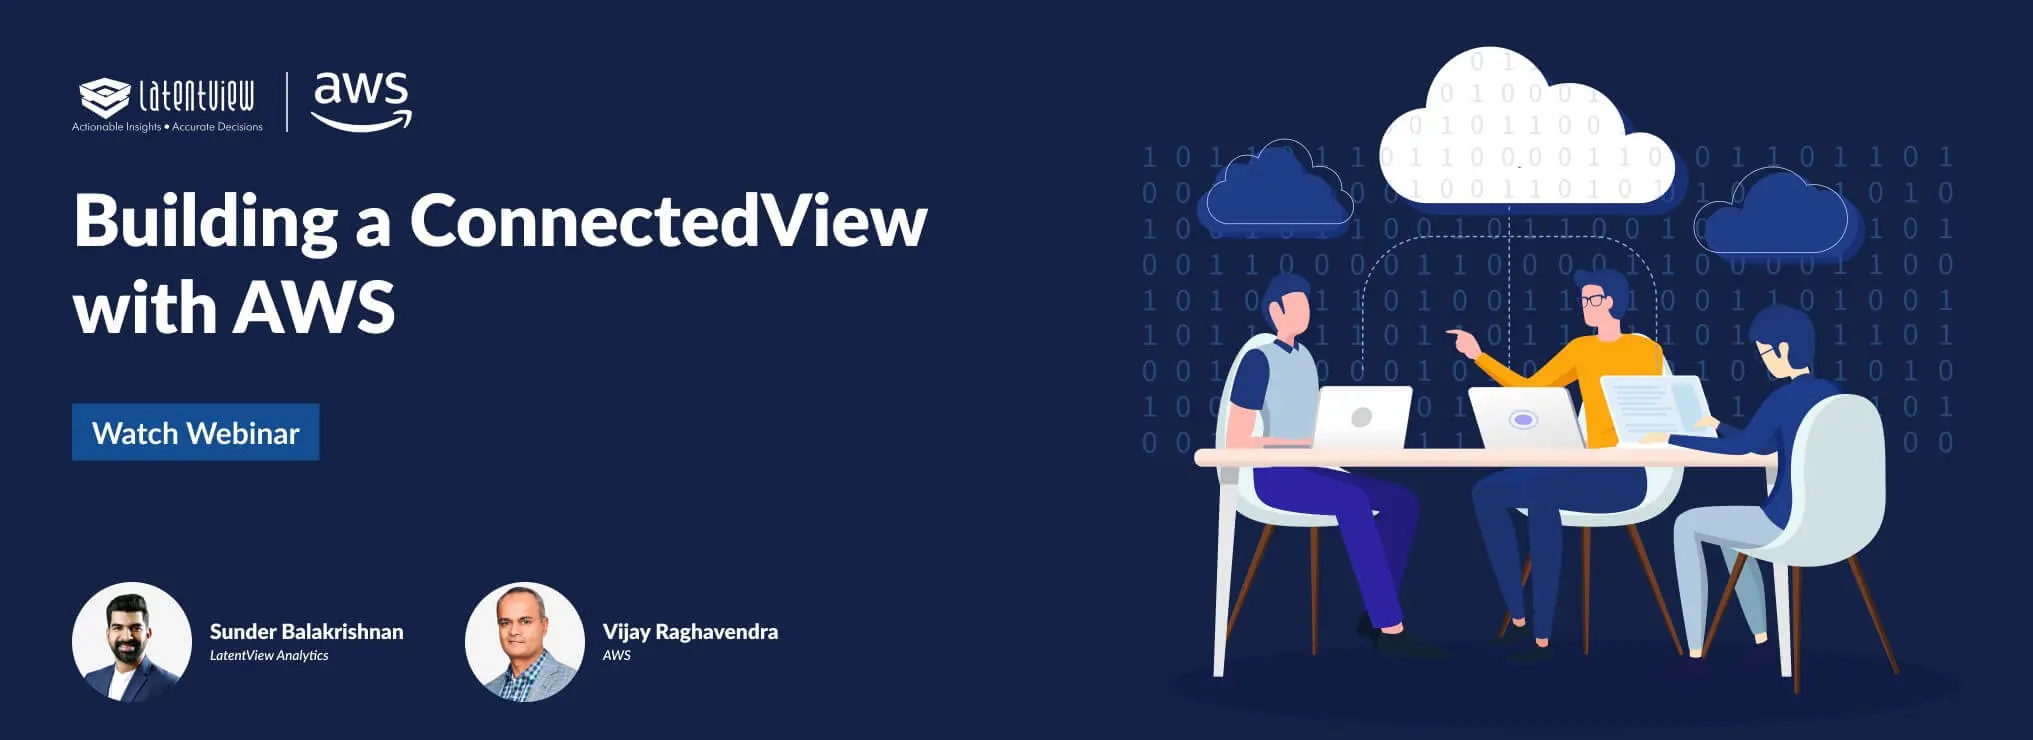 building a connectedview with aws banner desktop 2